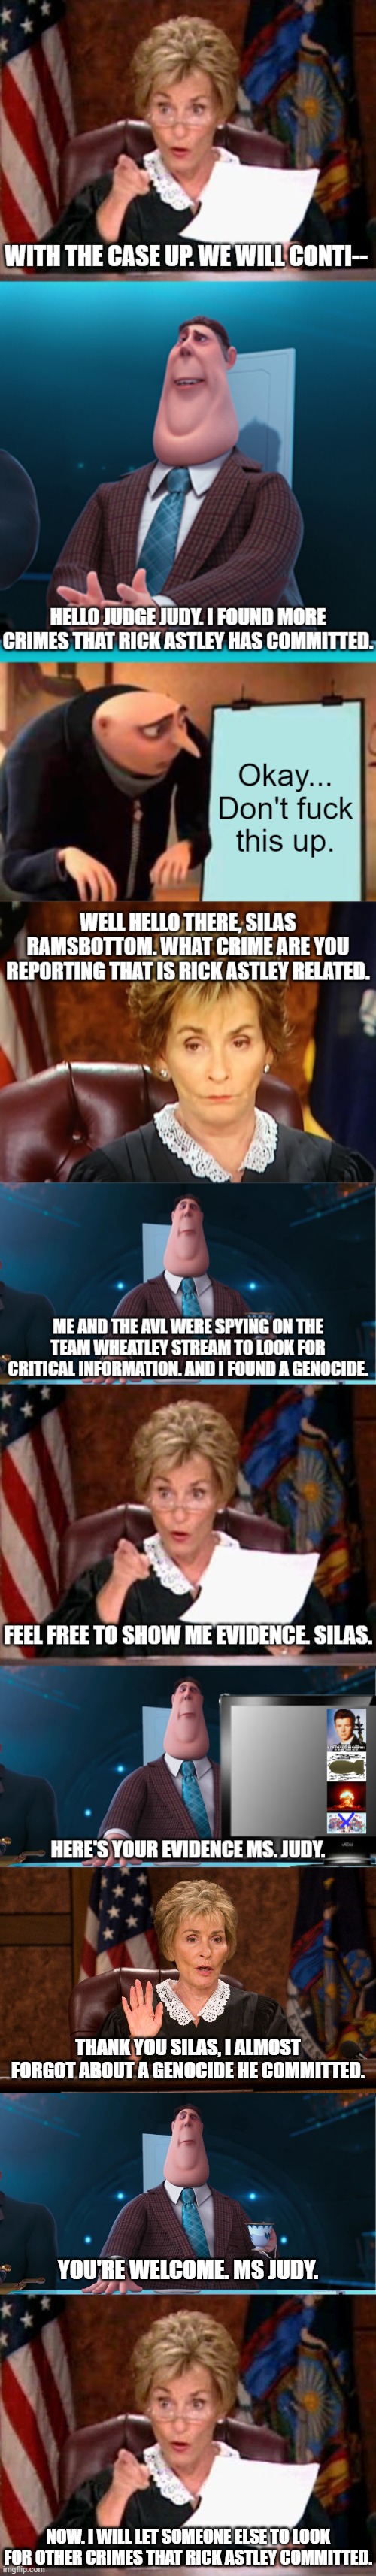 THANK YOU SILAS, I ALMOST FORGOT ABOUT A GENOCIDE HE COMMITTED. YOU'RE WELCOME. MS JUDY. NOW. I WILL LET SOMEONE ELSE TO LOOK FOR OTHER CRIMES THAT RICK ASTLEY COMMITTED. | image tagged in judge judy,the avl | made w/ Imgflip meme maker